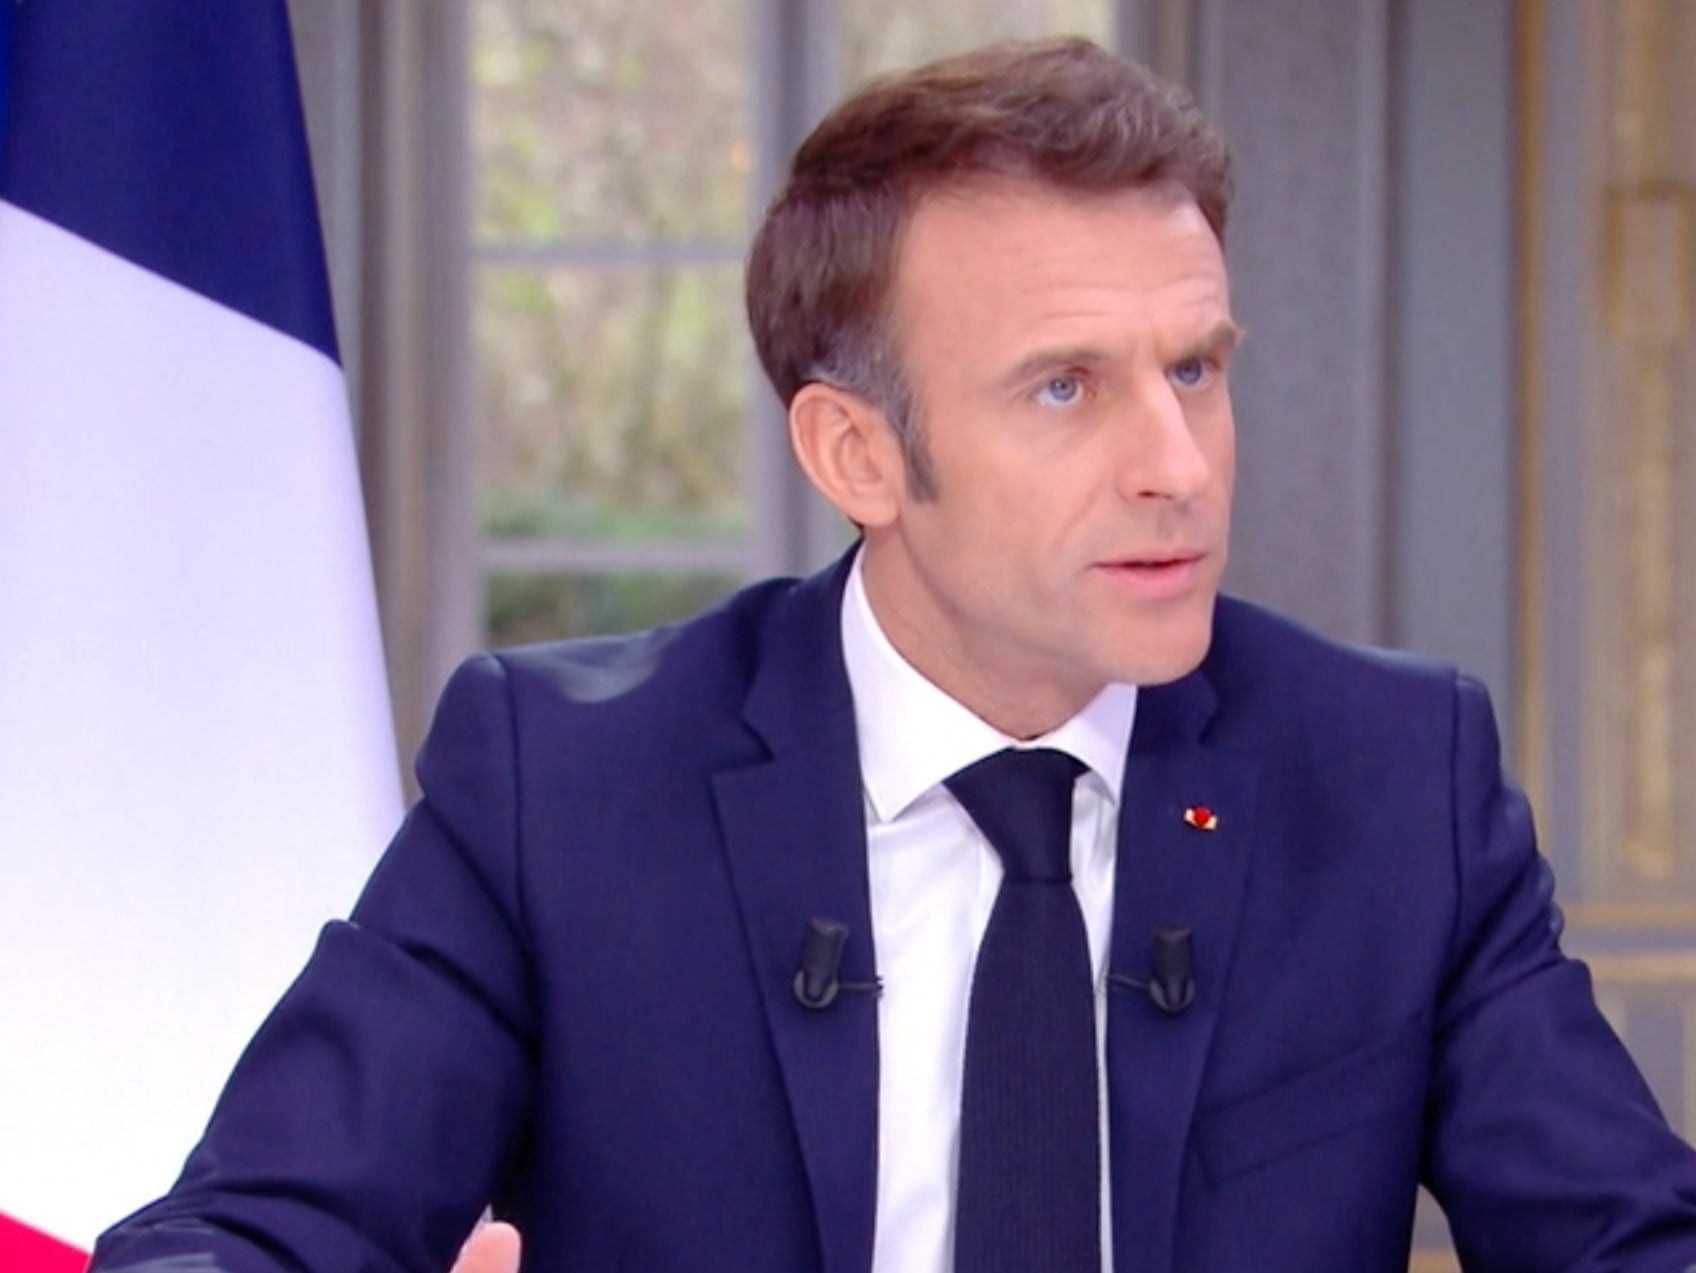 Emmanuel Macron could be seen removing his watch during the televised interview